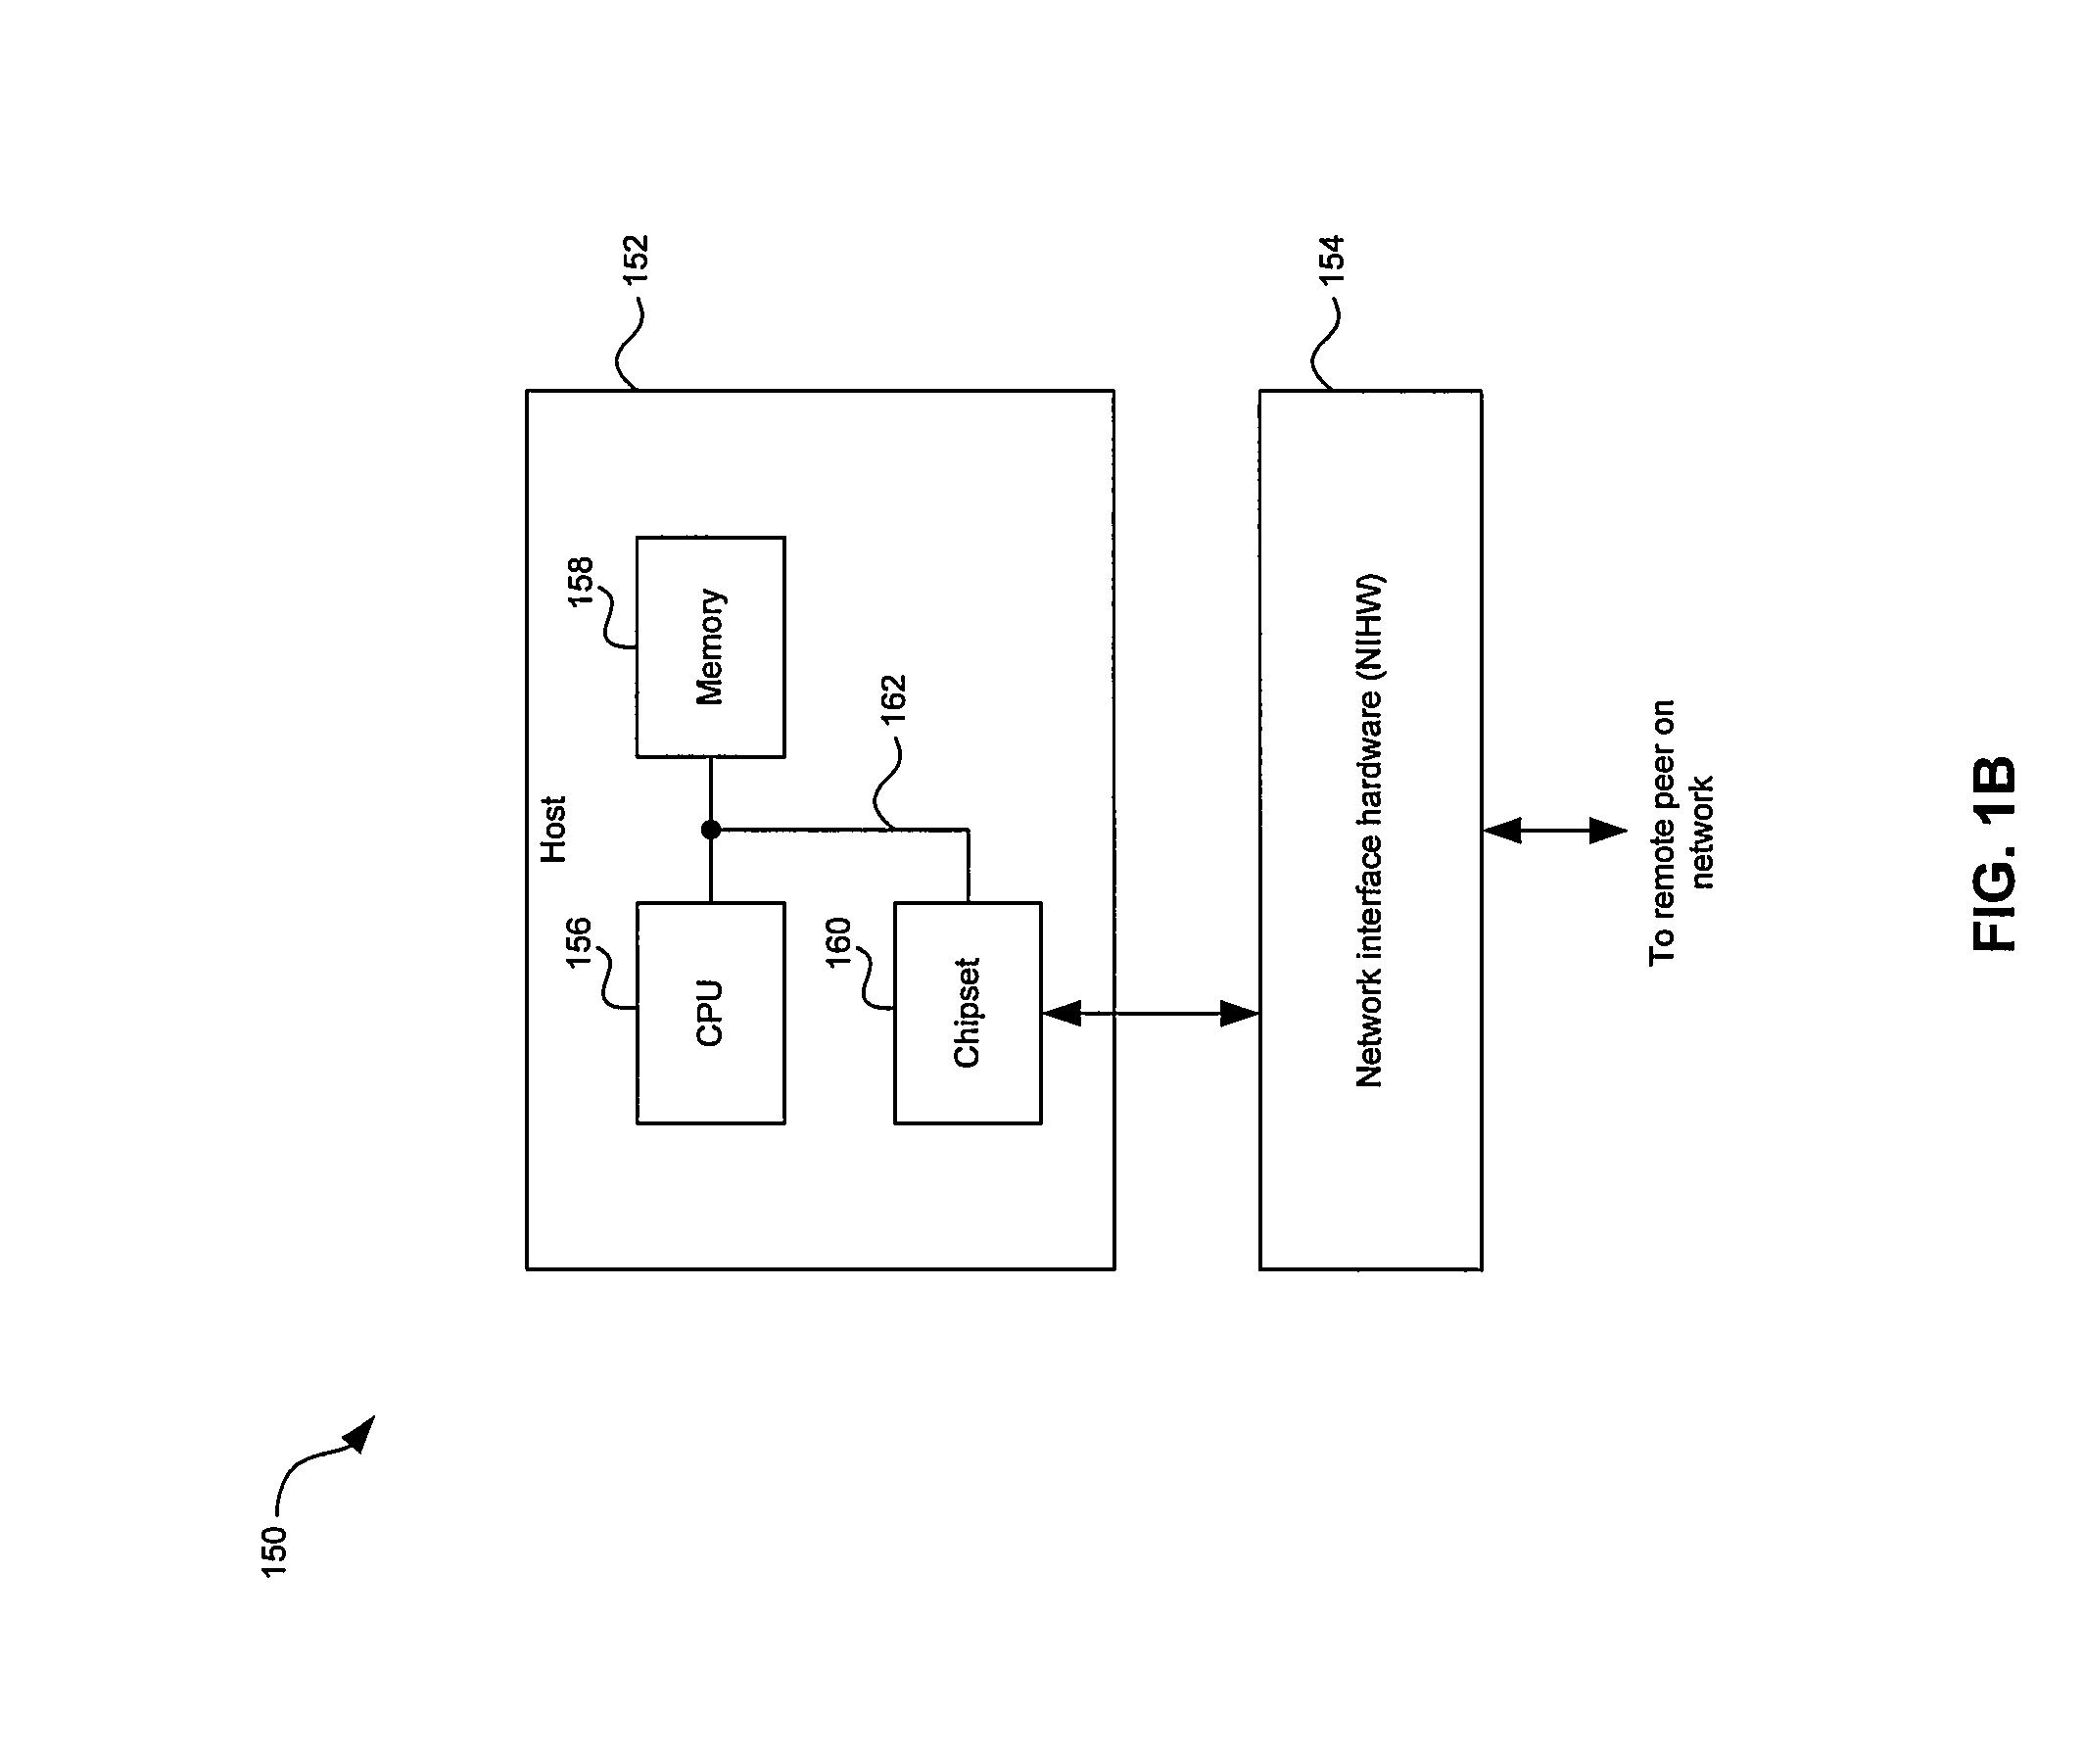 Method and System for Light-Weight SOAP Transport for Web Services Based Management